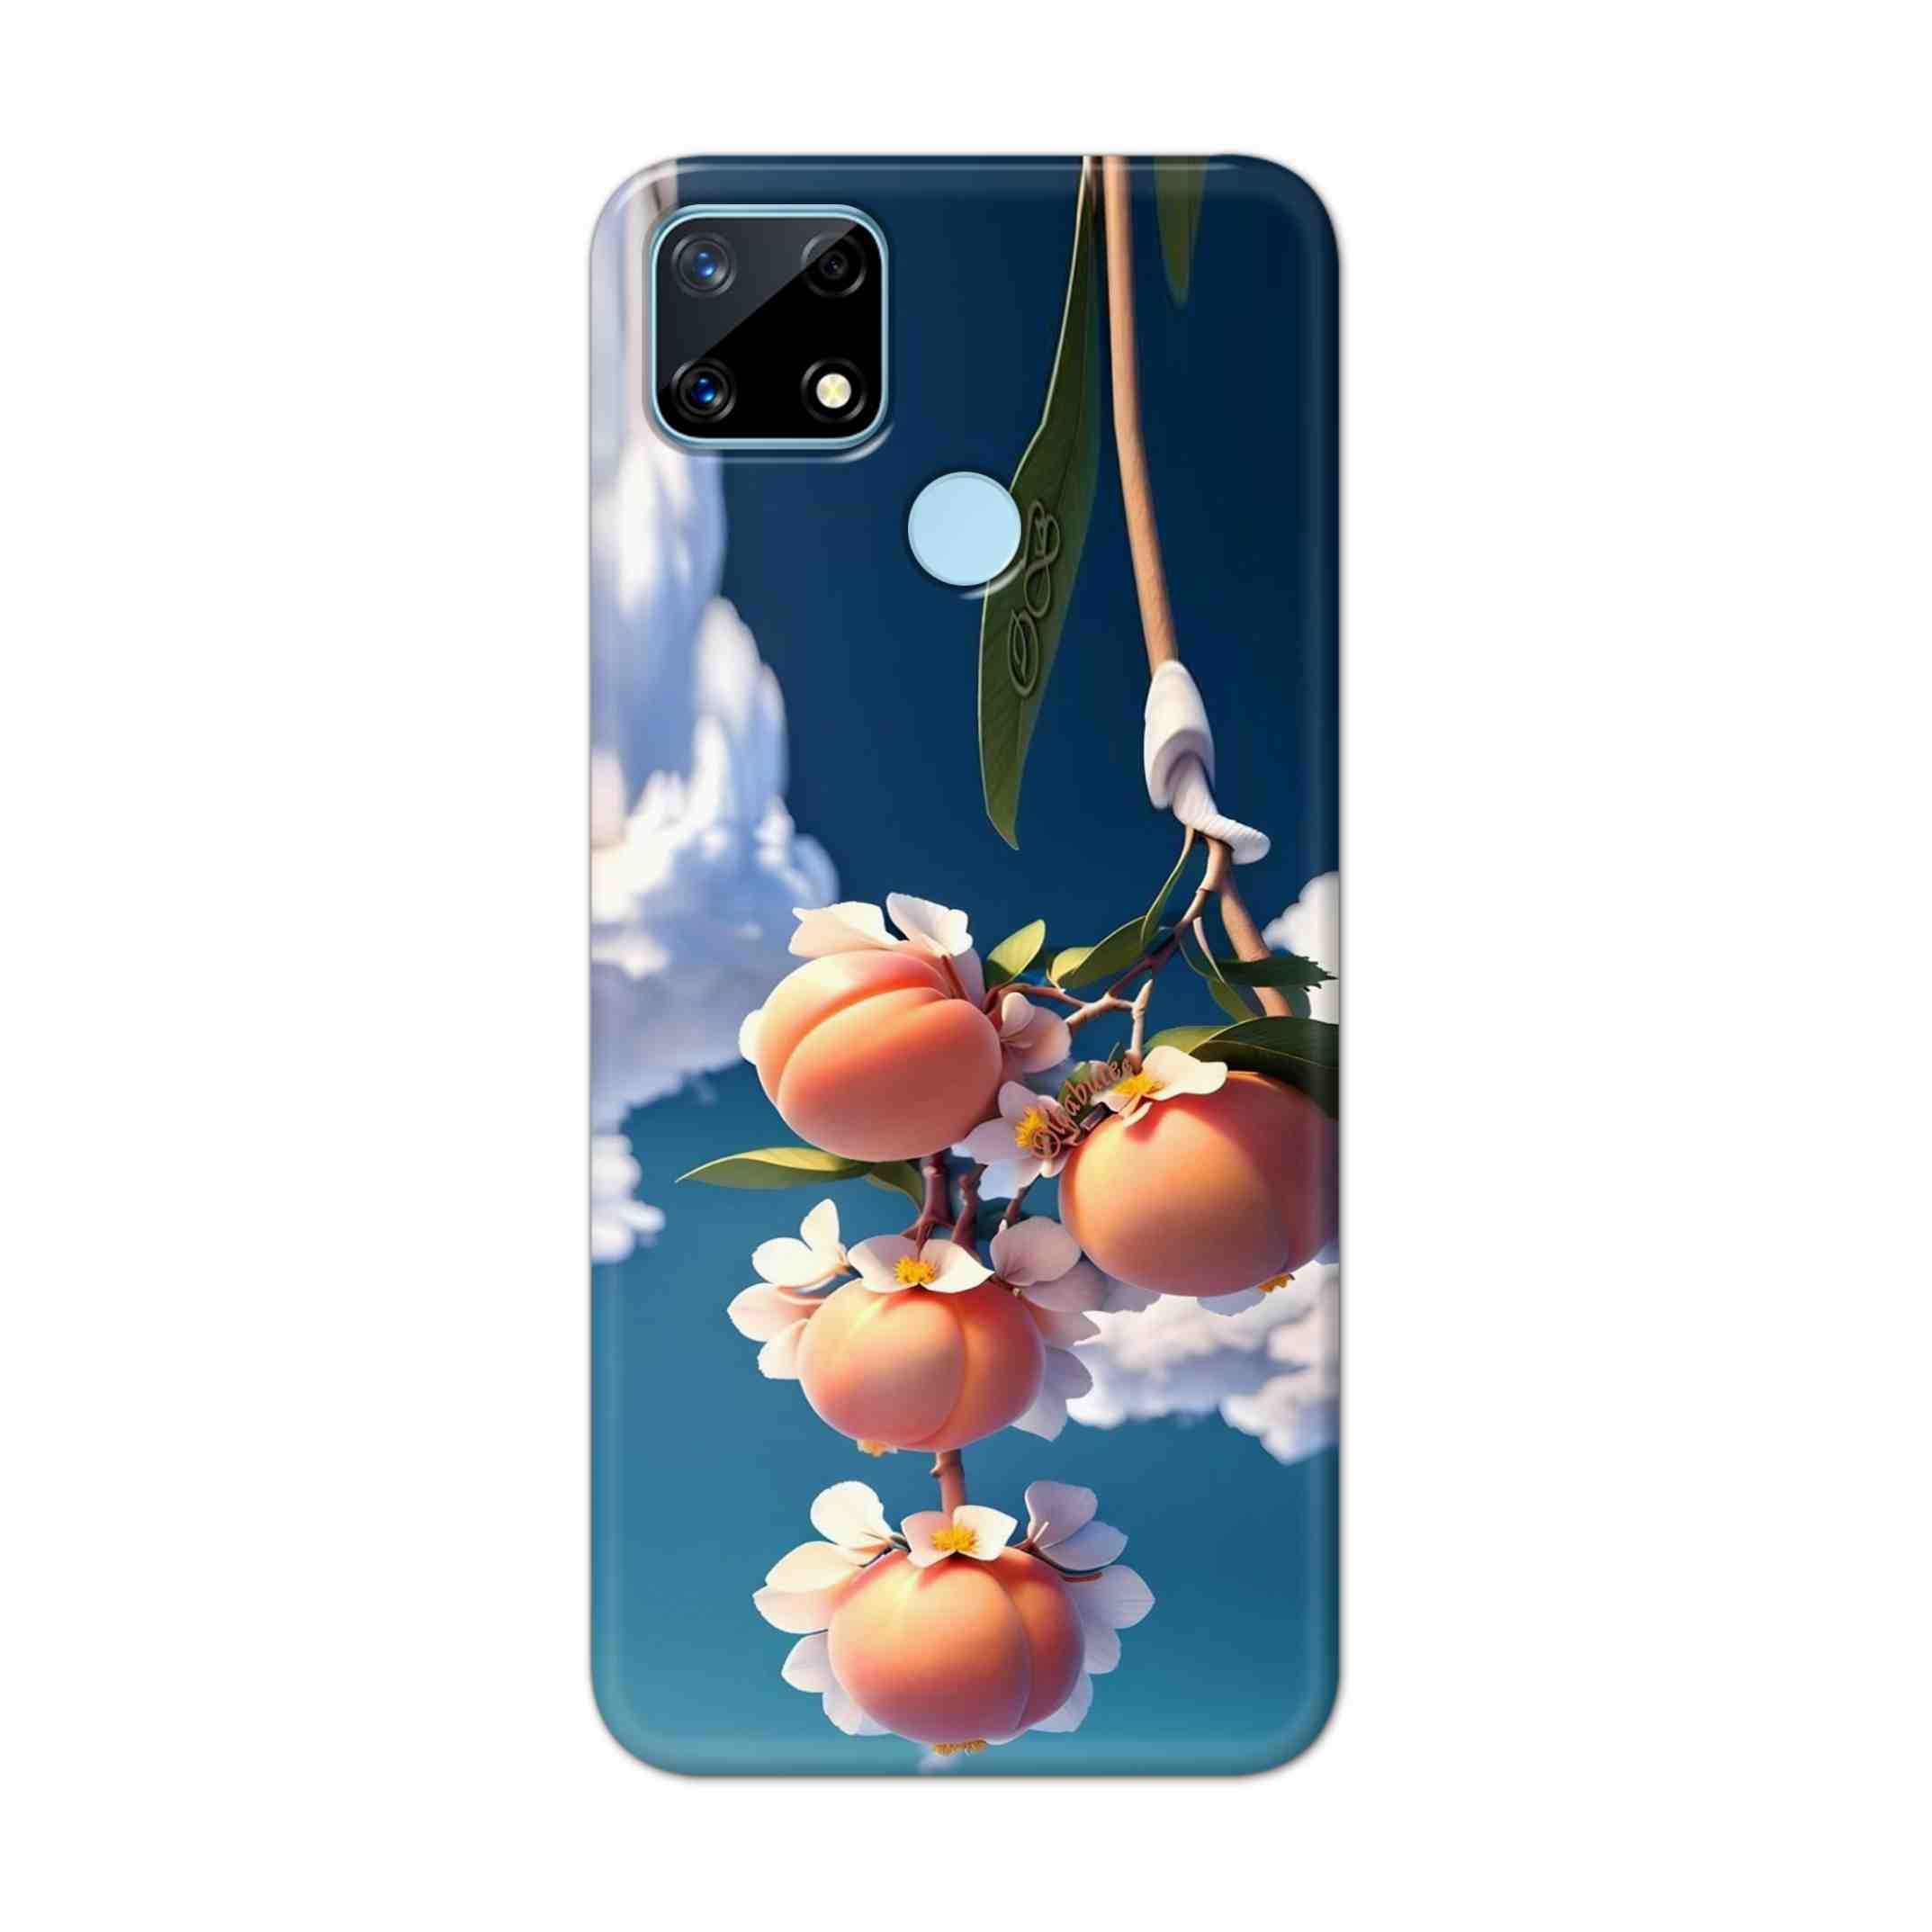 Buy Fruit Hard Back Mobile Phone Case Cover For Realme Narzo 20 Online